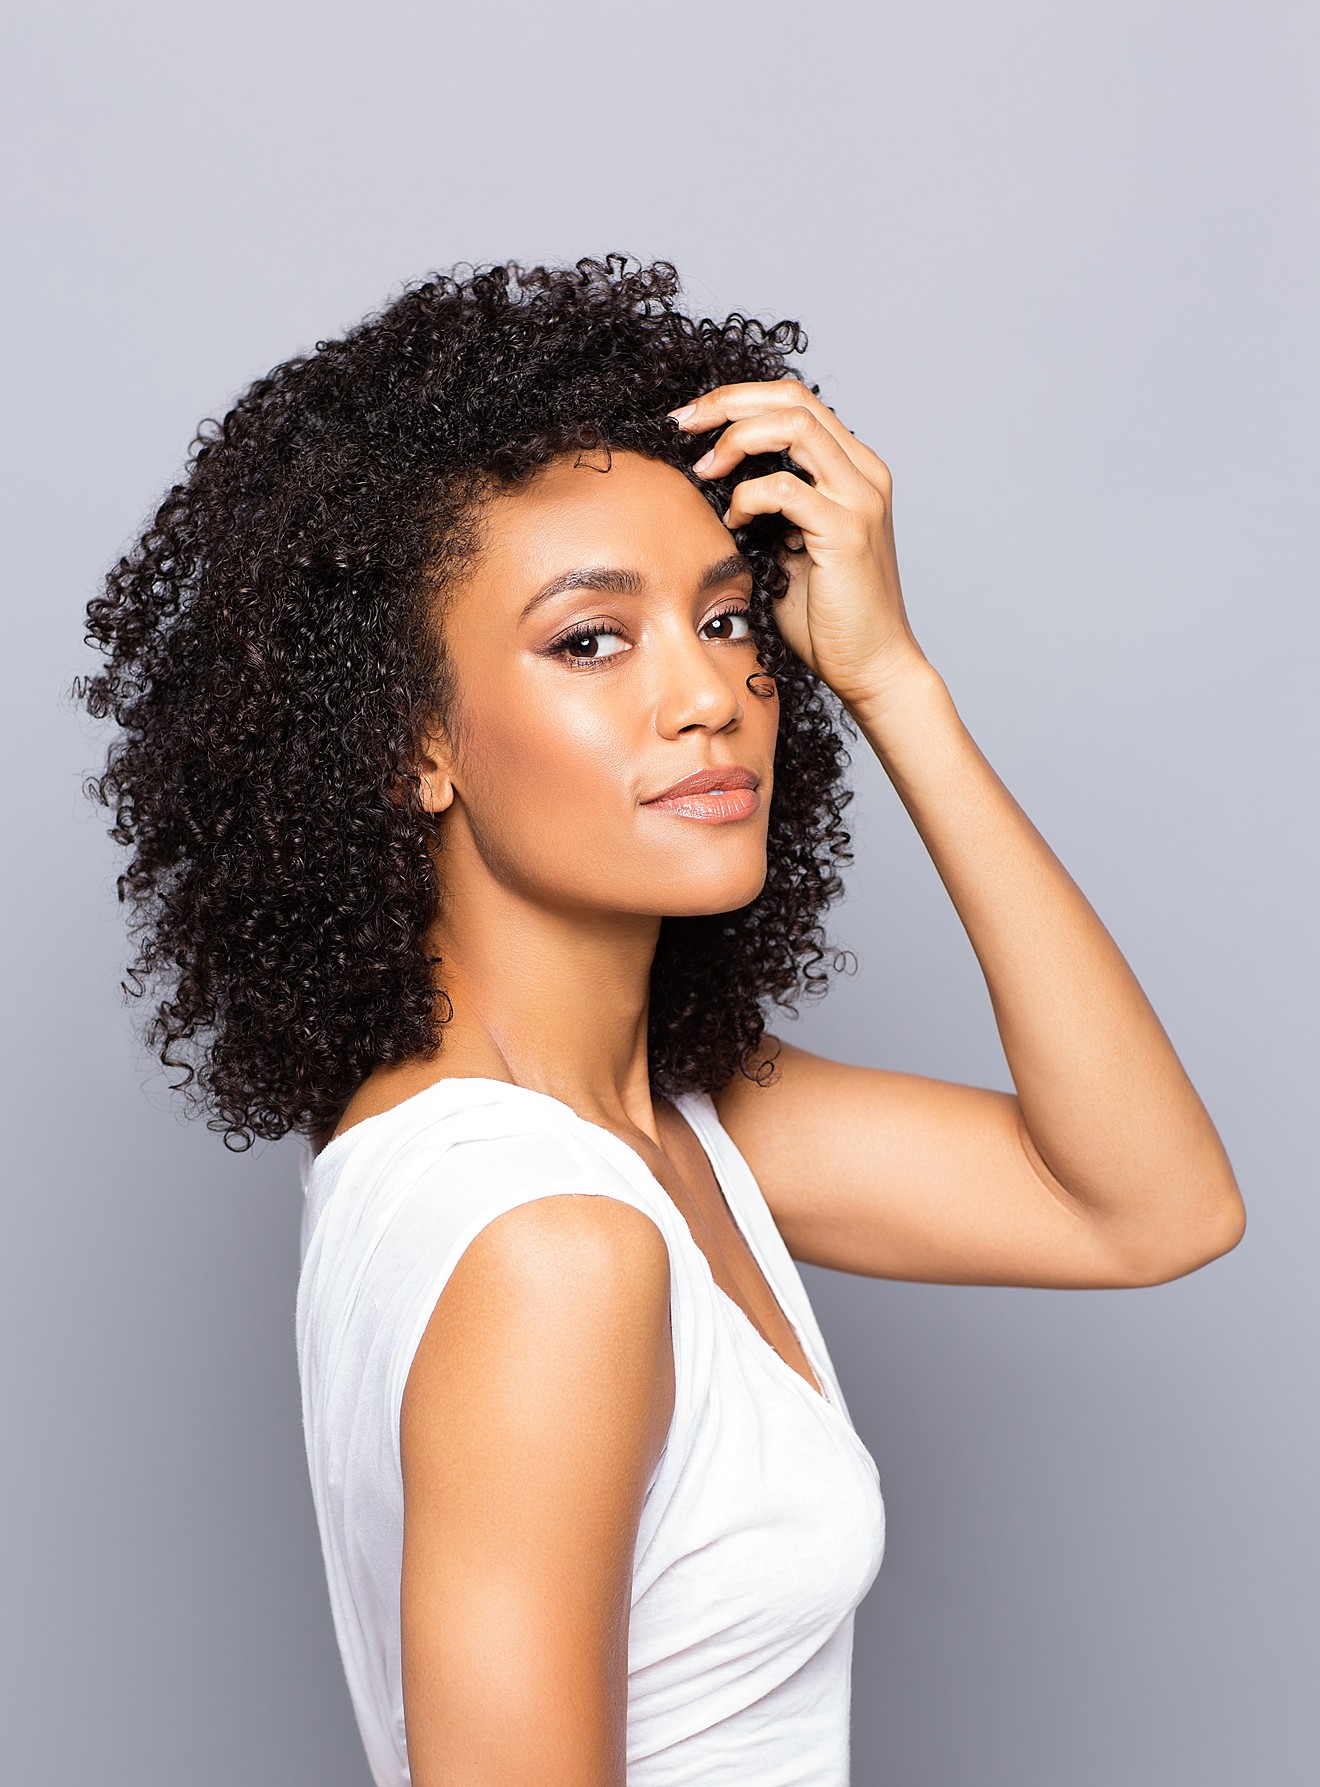 Annie Ilonzeh attended Colleyville Heritage High School and now stars in big-budget Hollywood films.